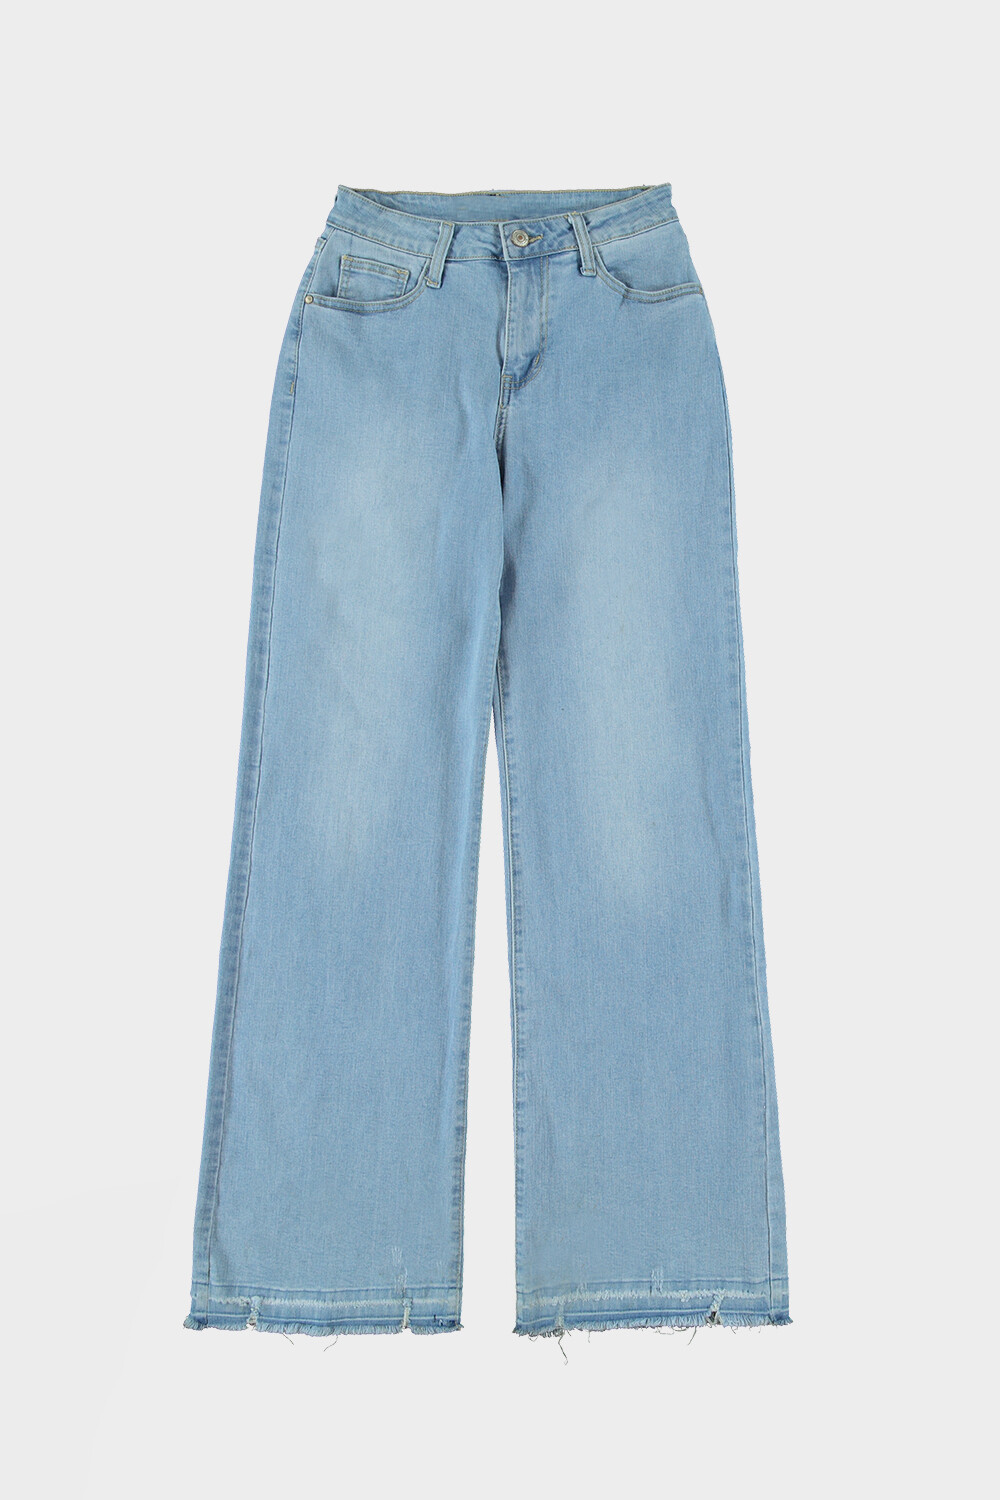 JD317-1 light blue Flared jeans- Turquoise by Daan